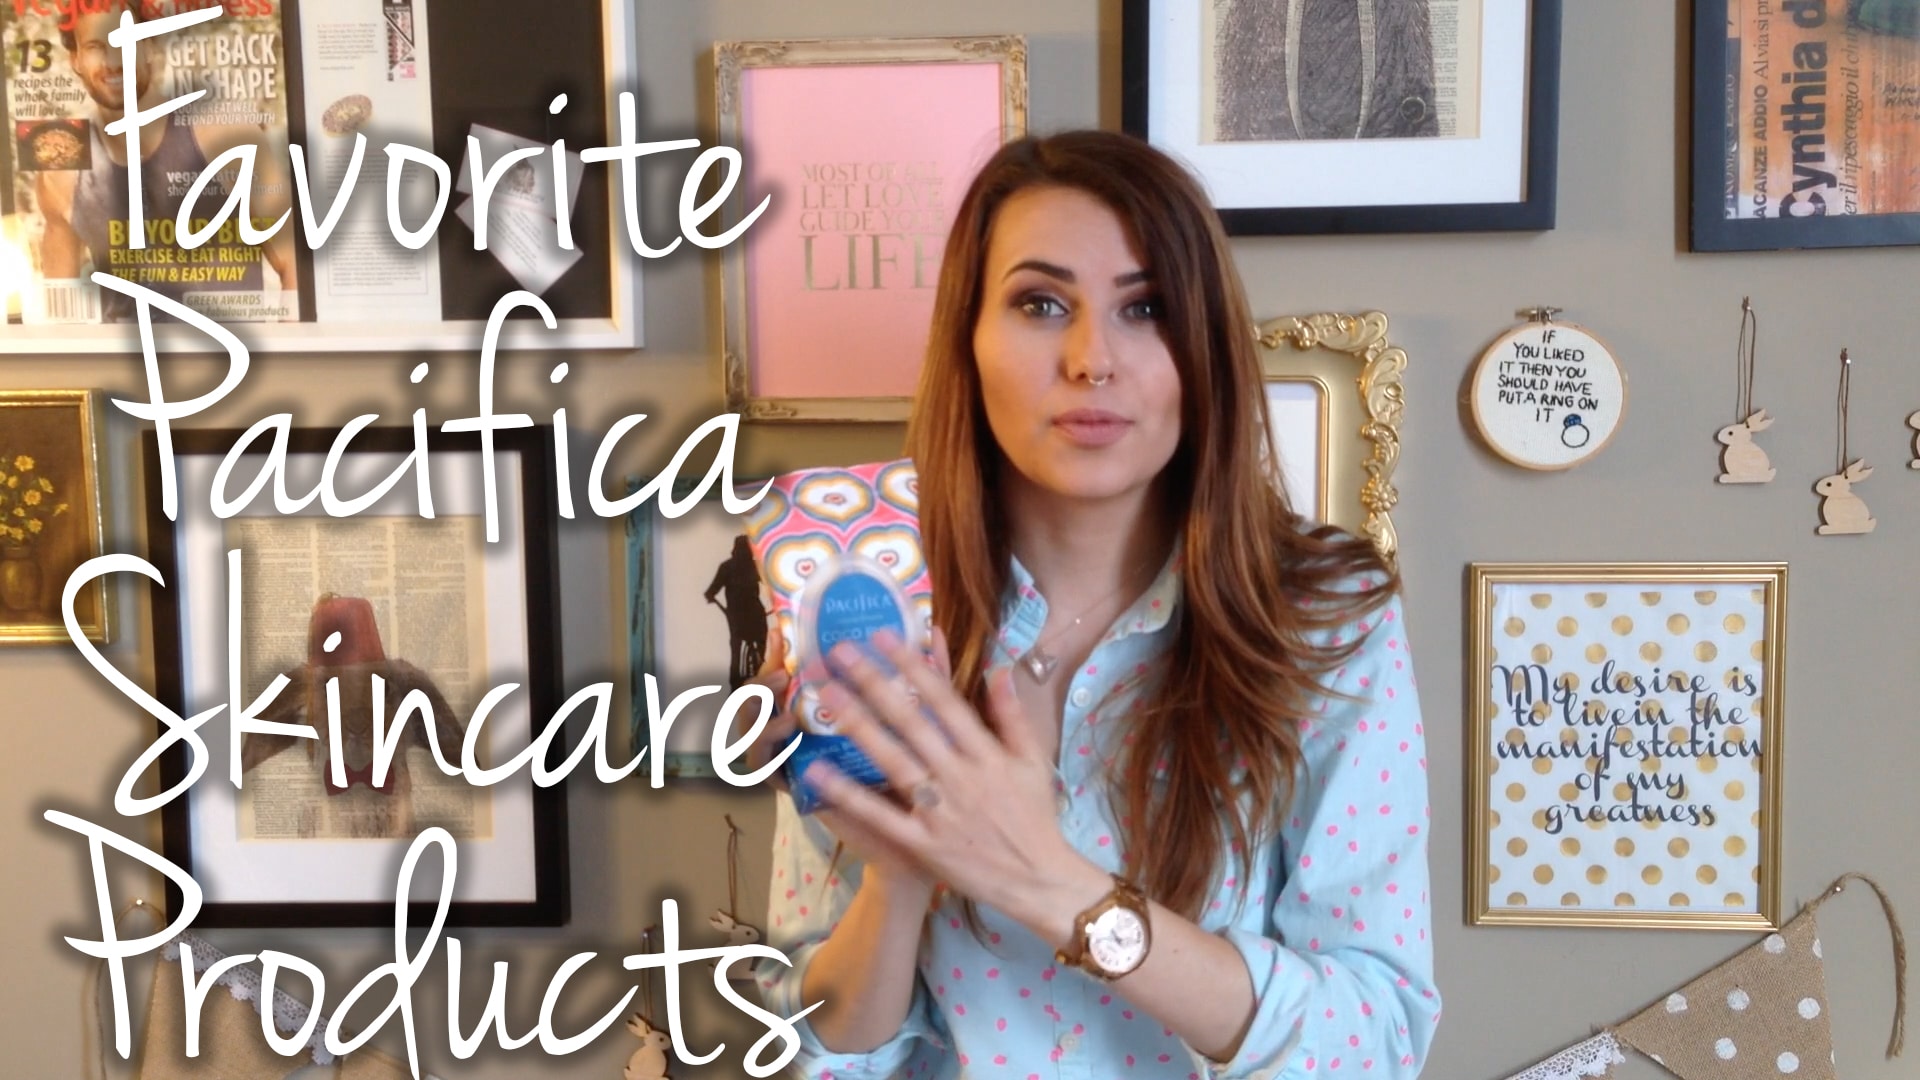 Favorite Pacifica Skincare Products Video